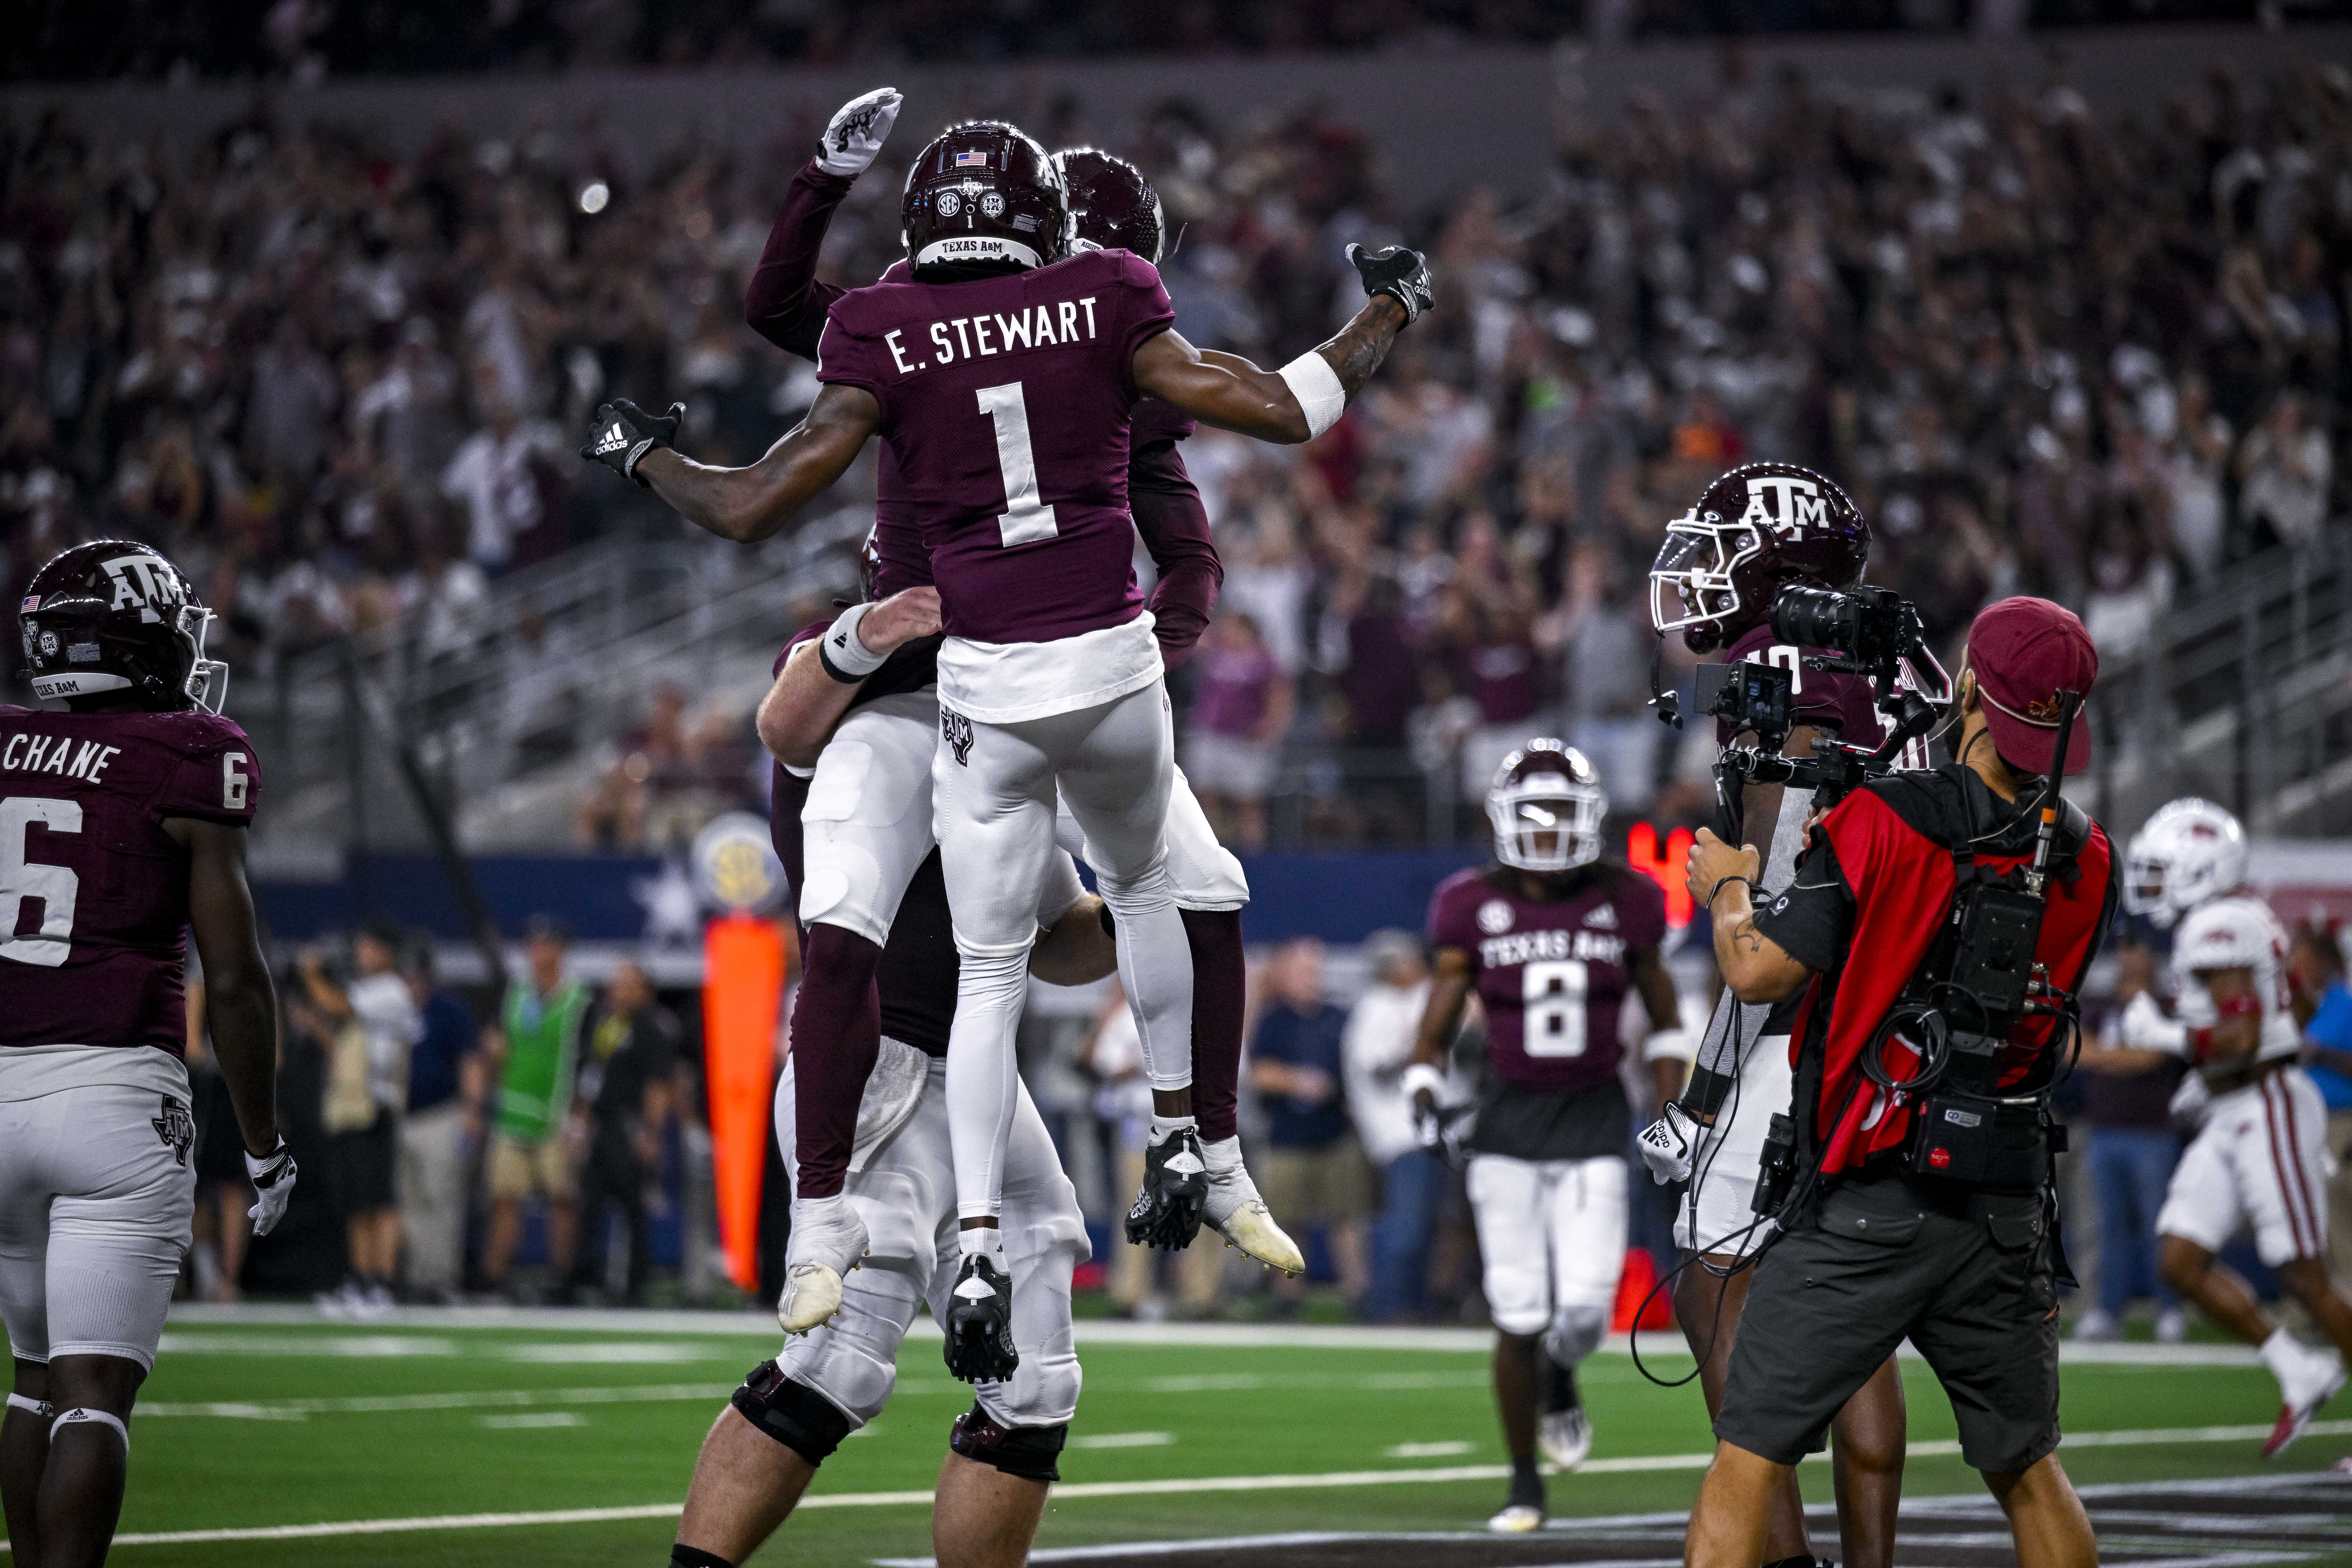 Report: Texas A&M WR Evan Stewart has returned to spring football practice